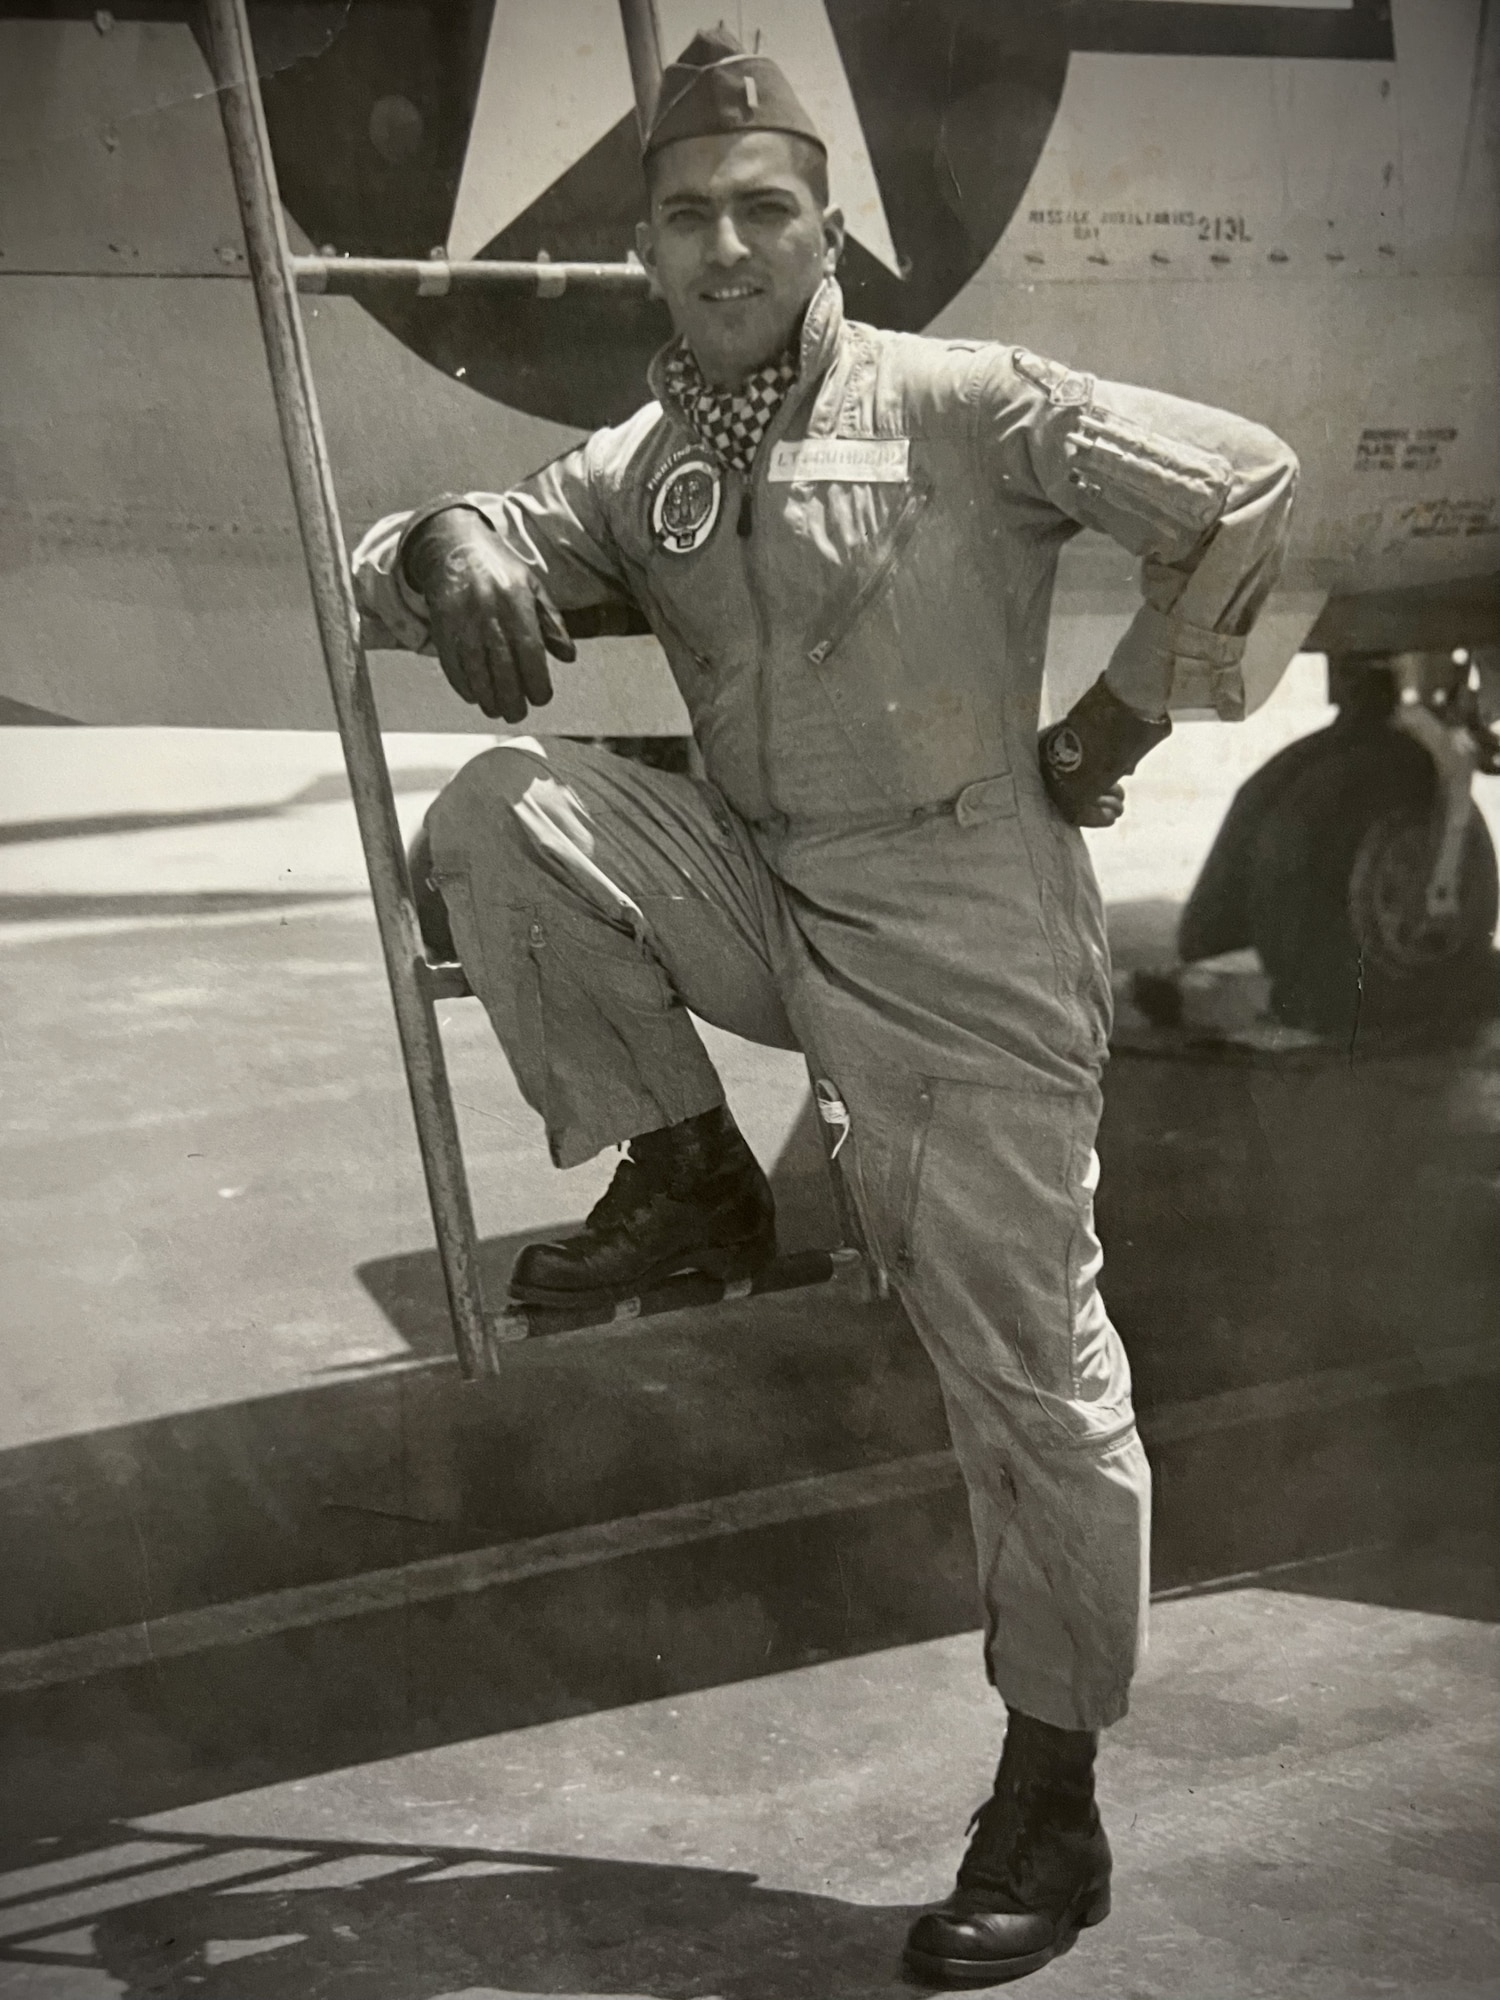 Bill Cordero - Early in his Air Force career